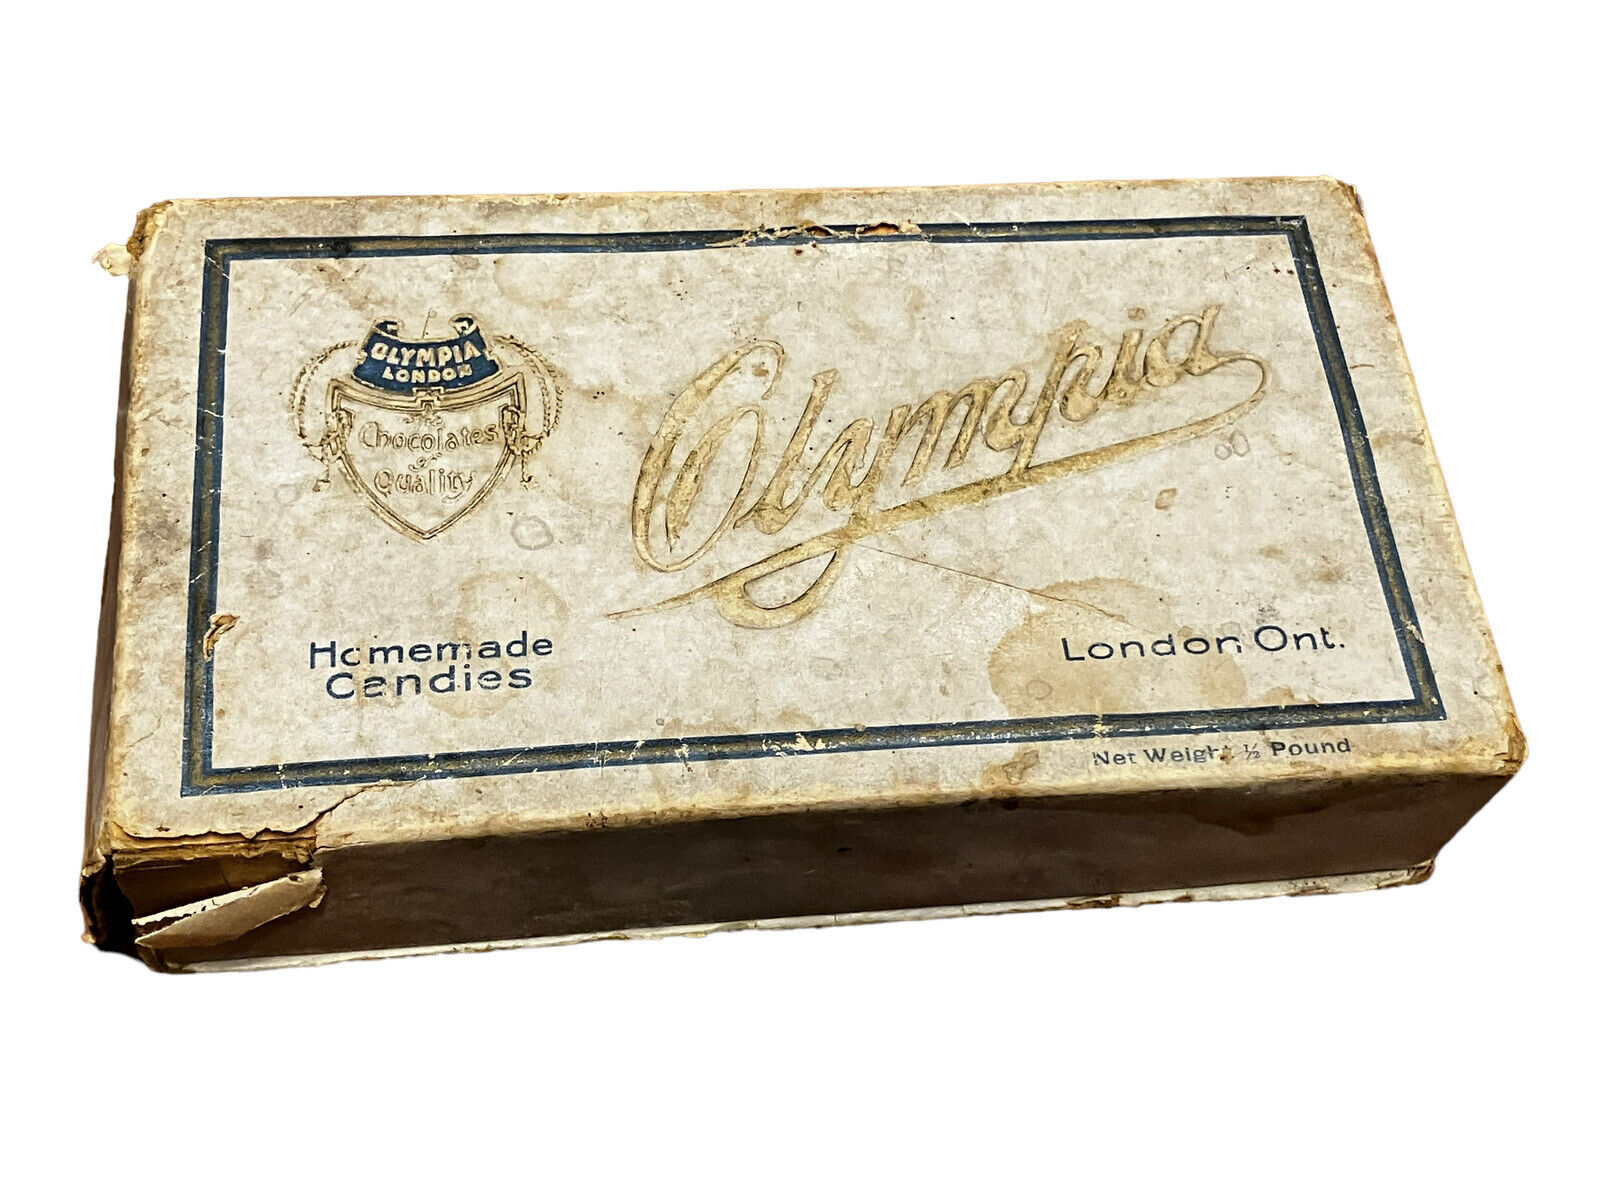 Olympia London Chocolates of Quality and Candies Cardboard Box Ontario Old Store